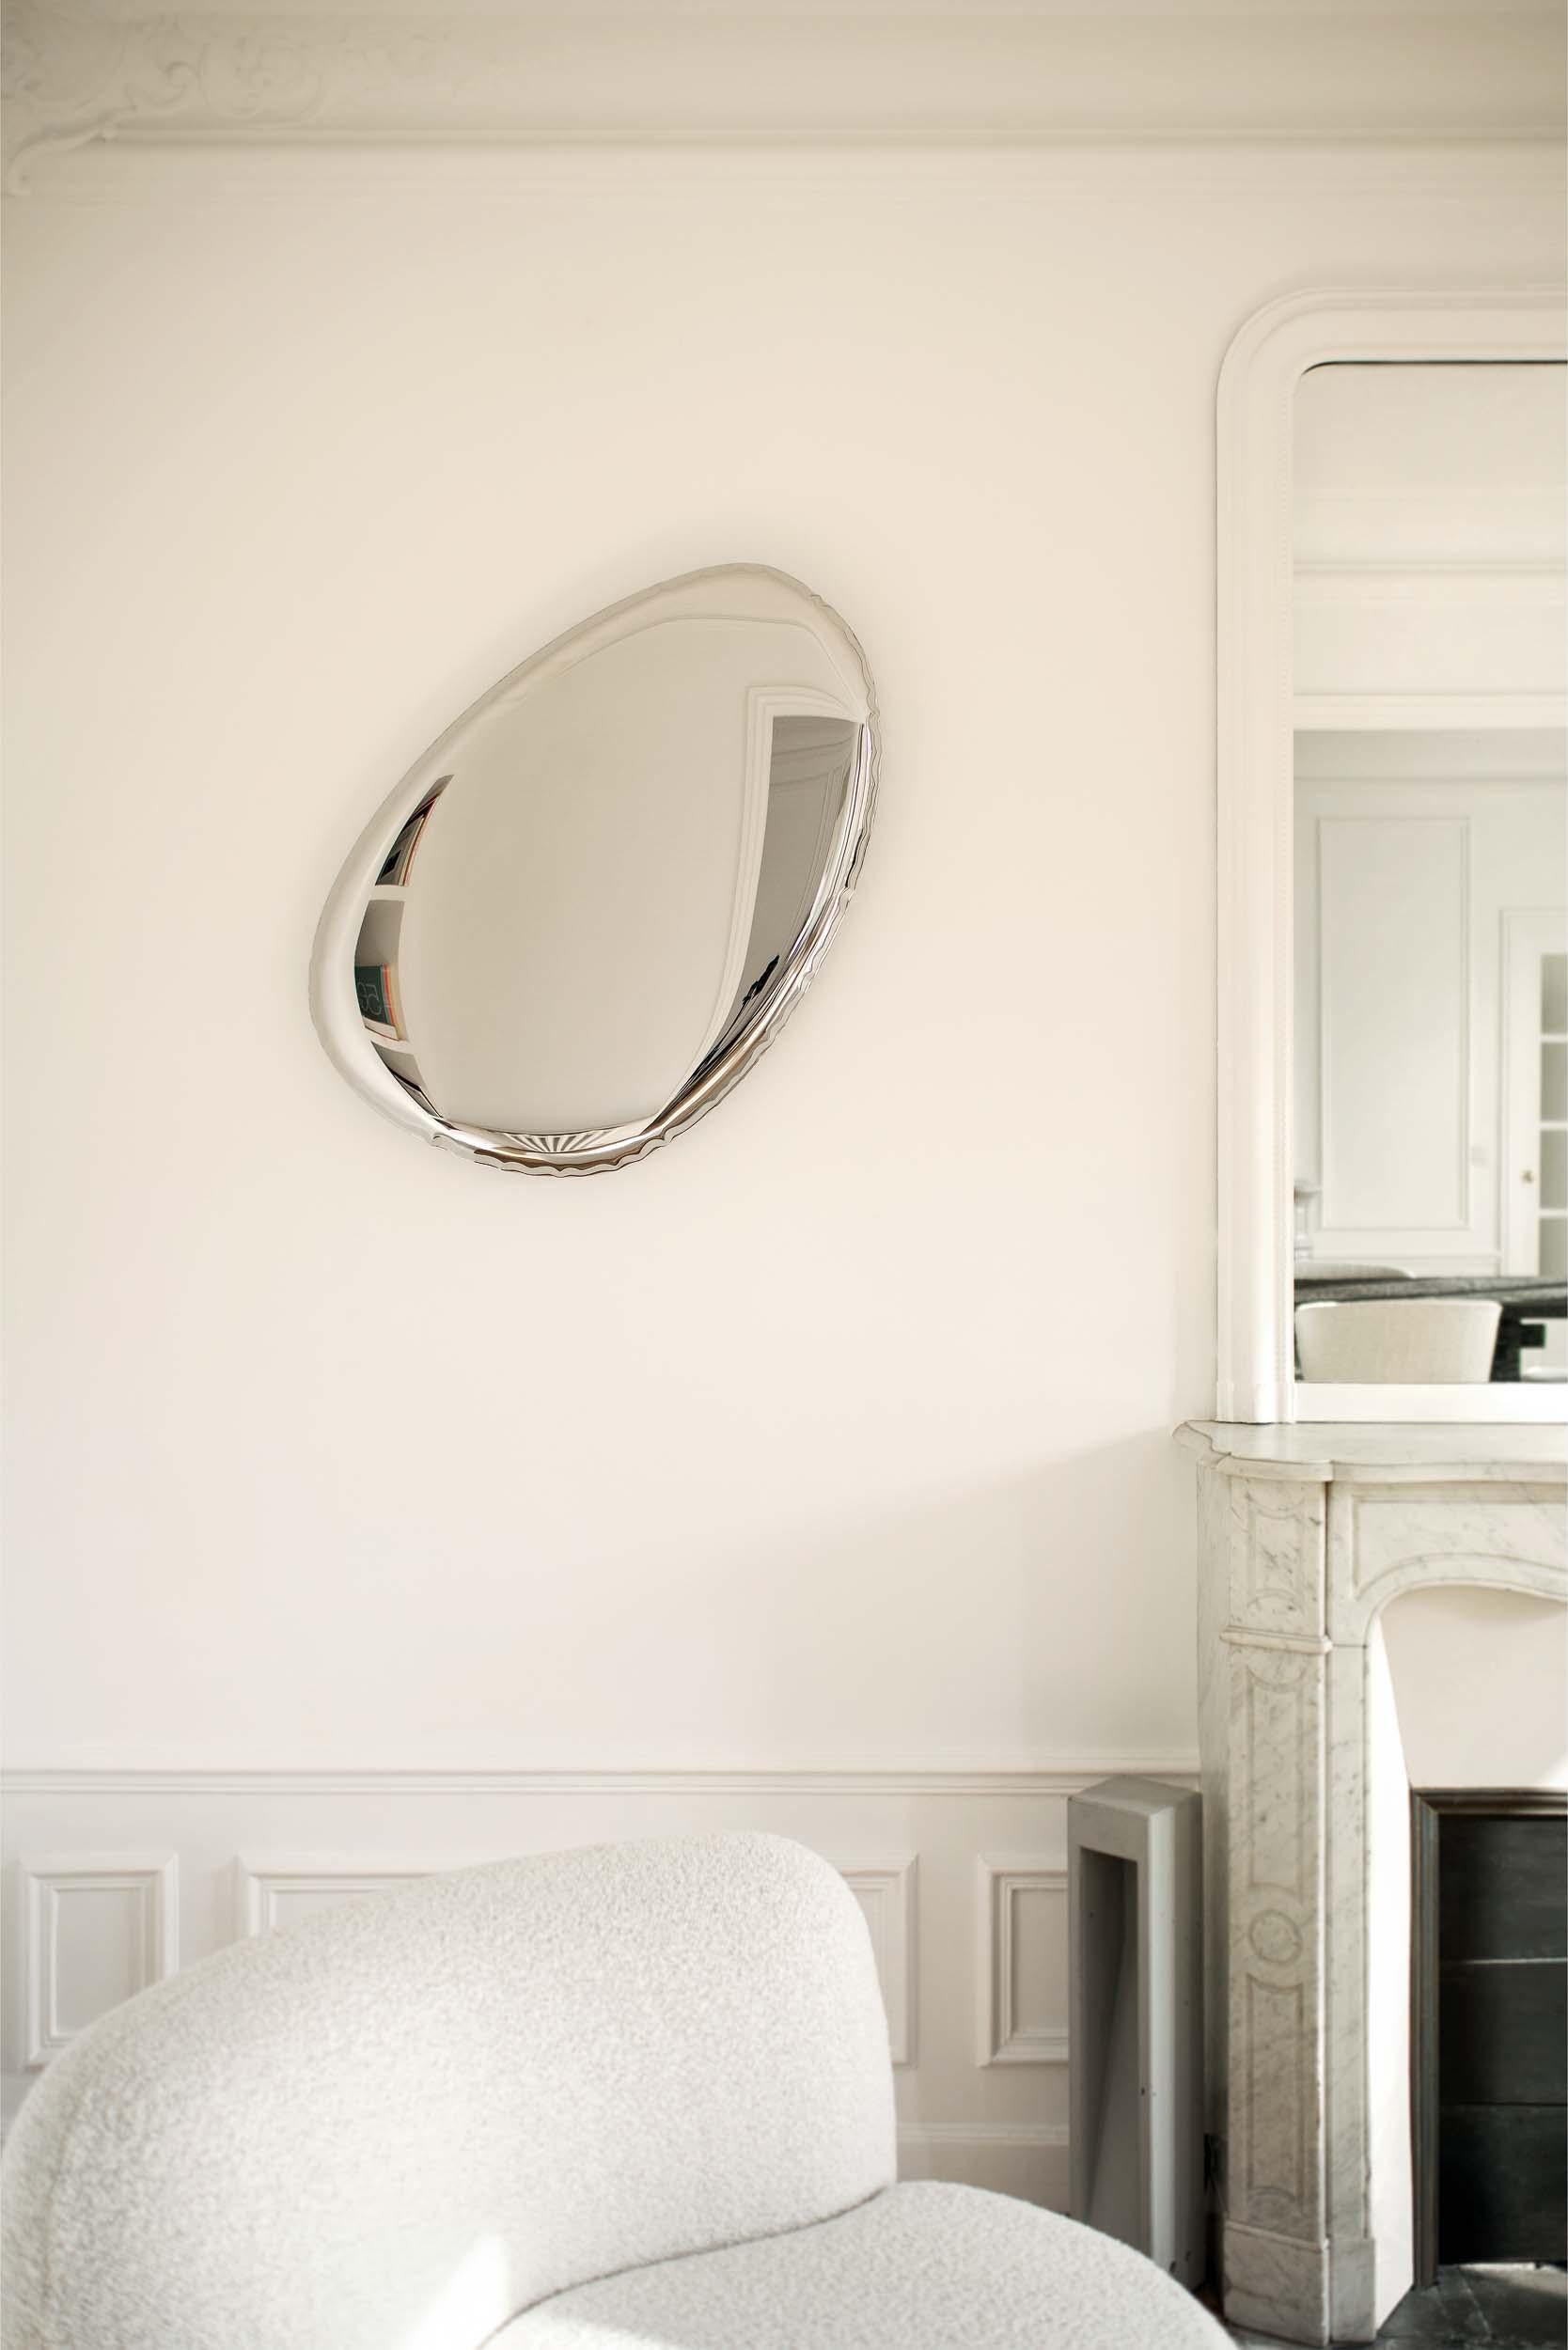 Tafla O4.5 contemporary mirror by Zieta.
(New model created in 2020)

Delivered with certificate signed by the artist: Oskar Zieta for Zieta Studio.

Polished stainless steel
Measures: 86 x 57 x 6 cm.


Zieta is best known for his collection of